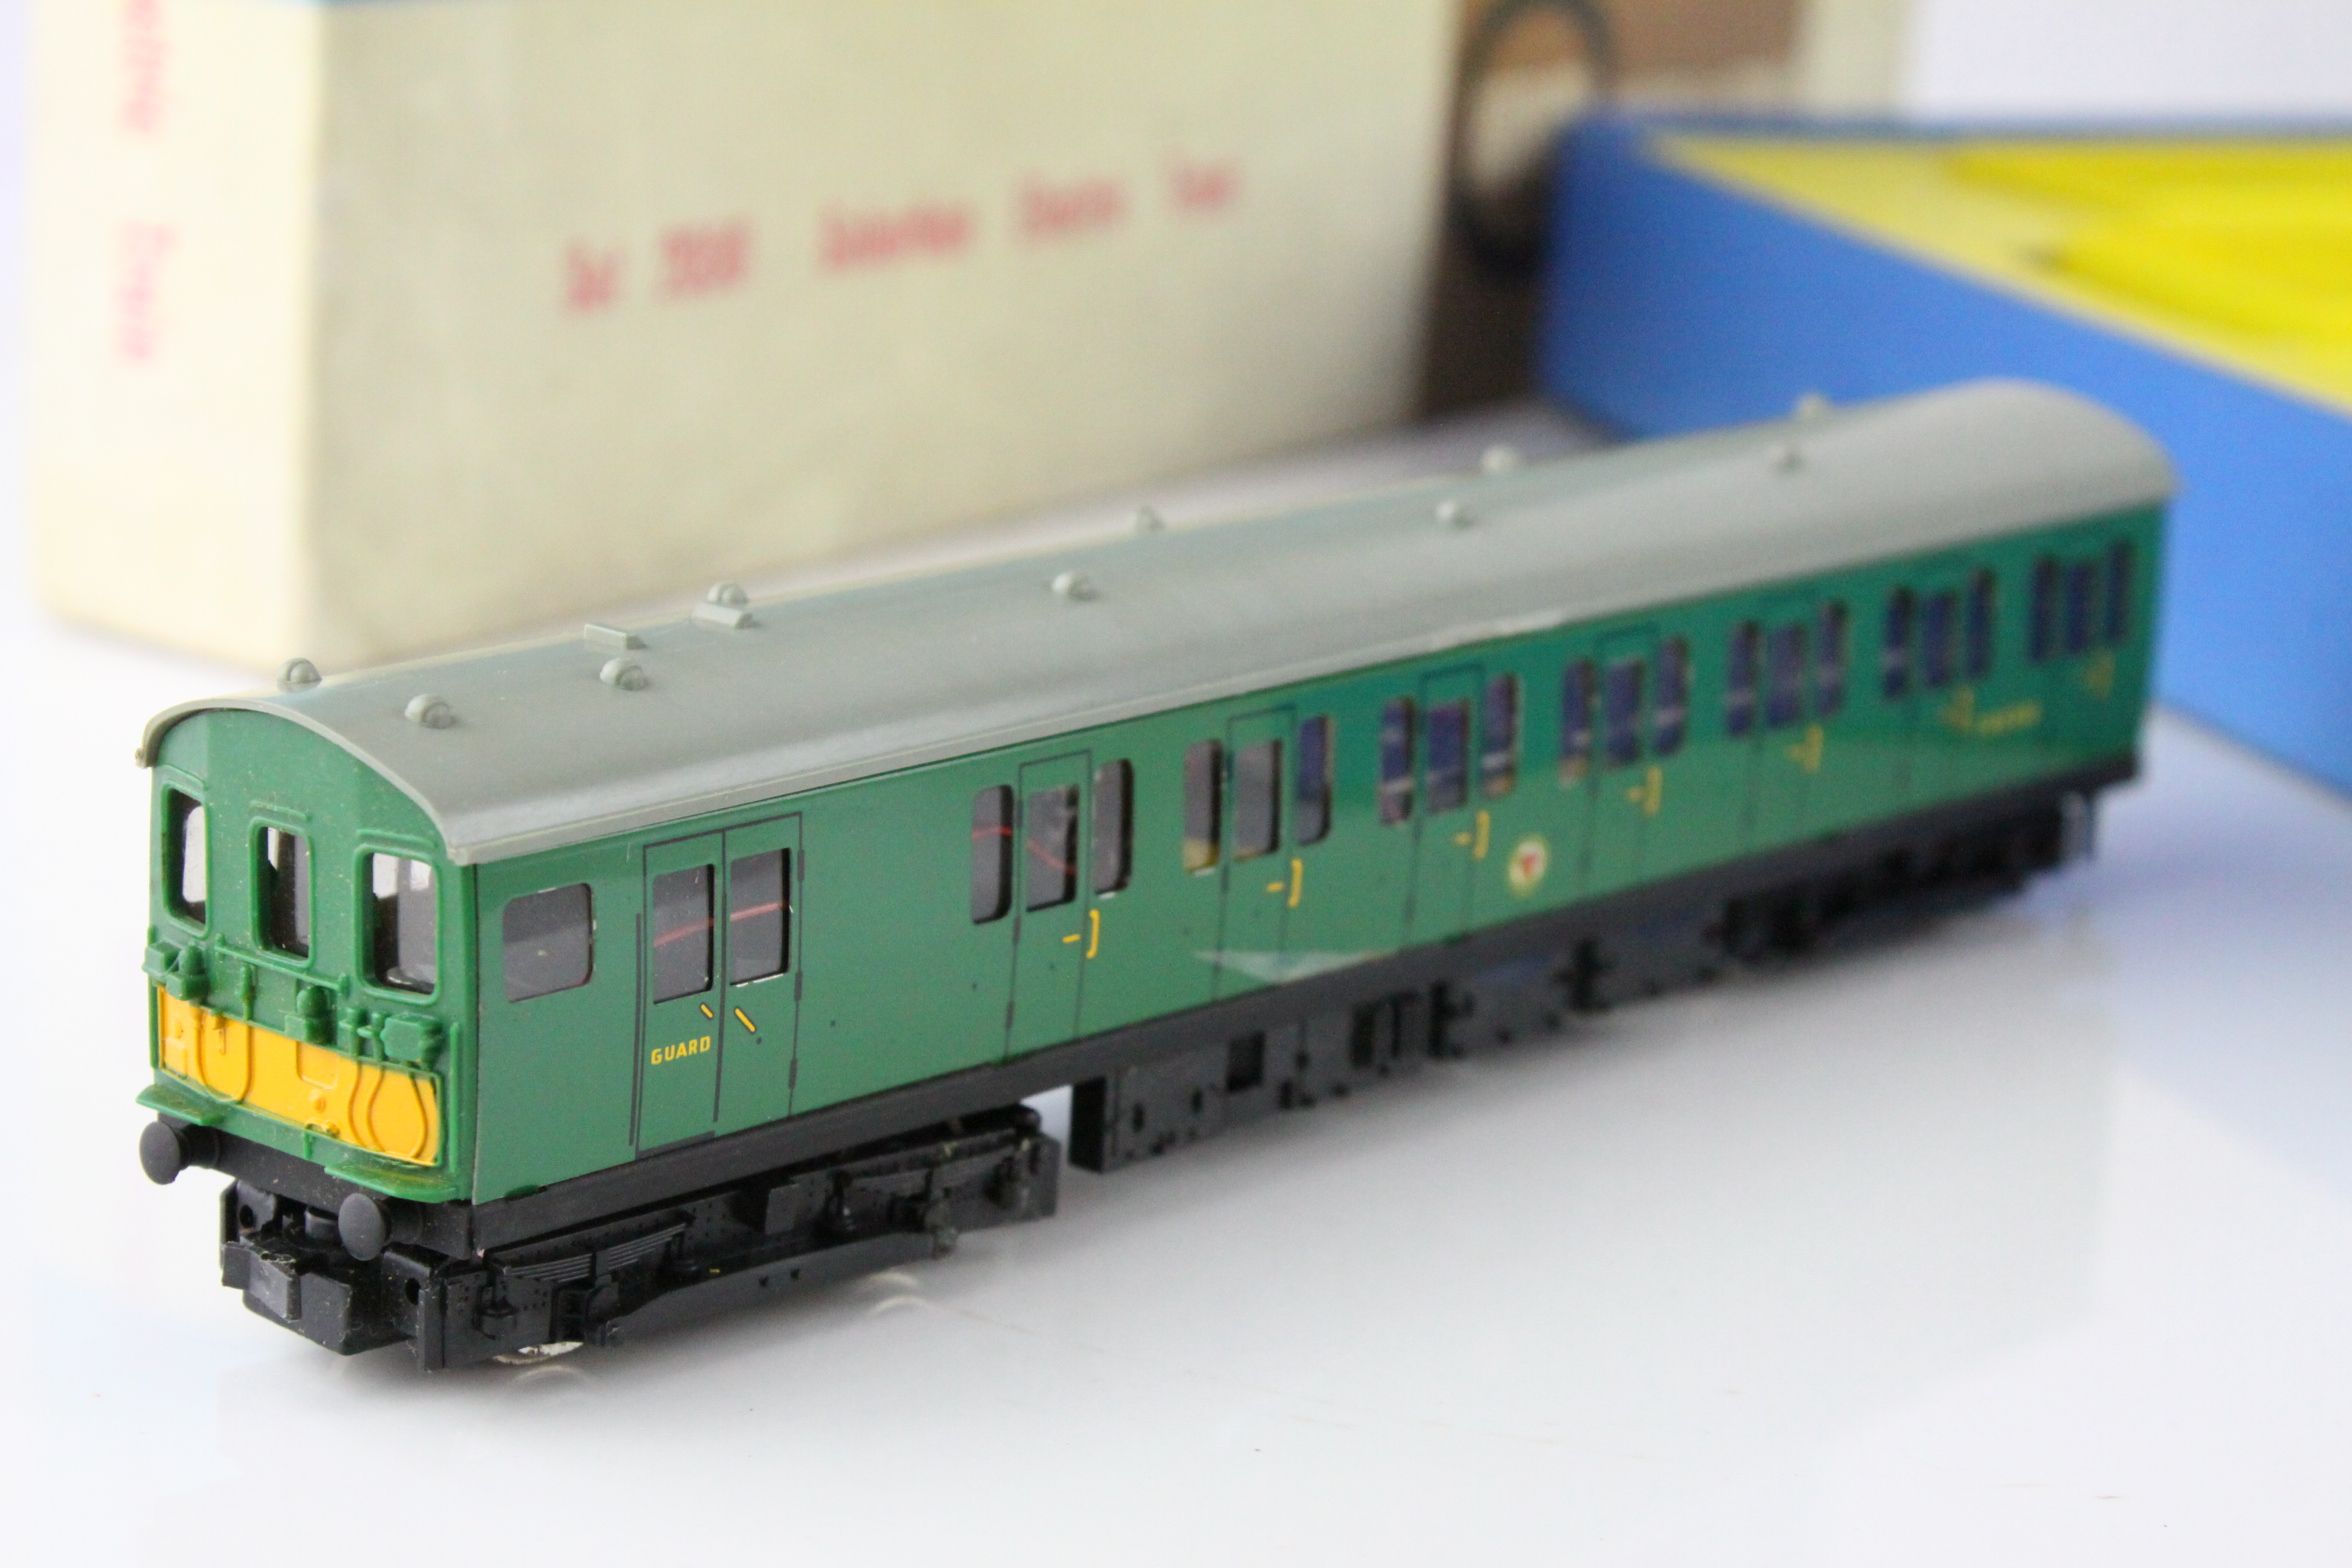 Boxed Hornby Dublo 2050 Surburban Electric Train Set, complete with paperwork, vg - Image 4 of 8